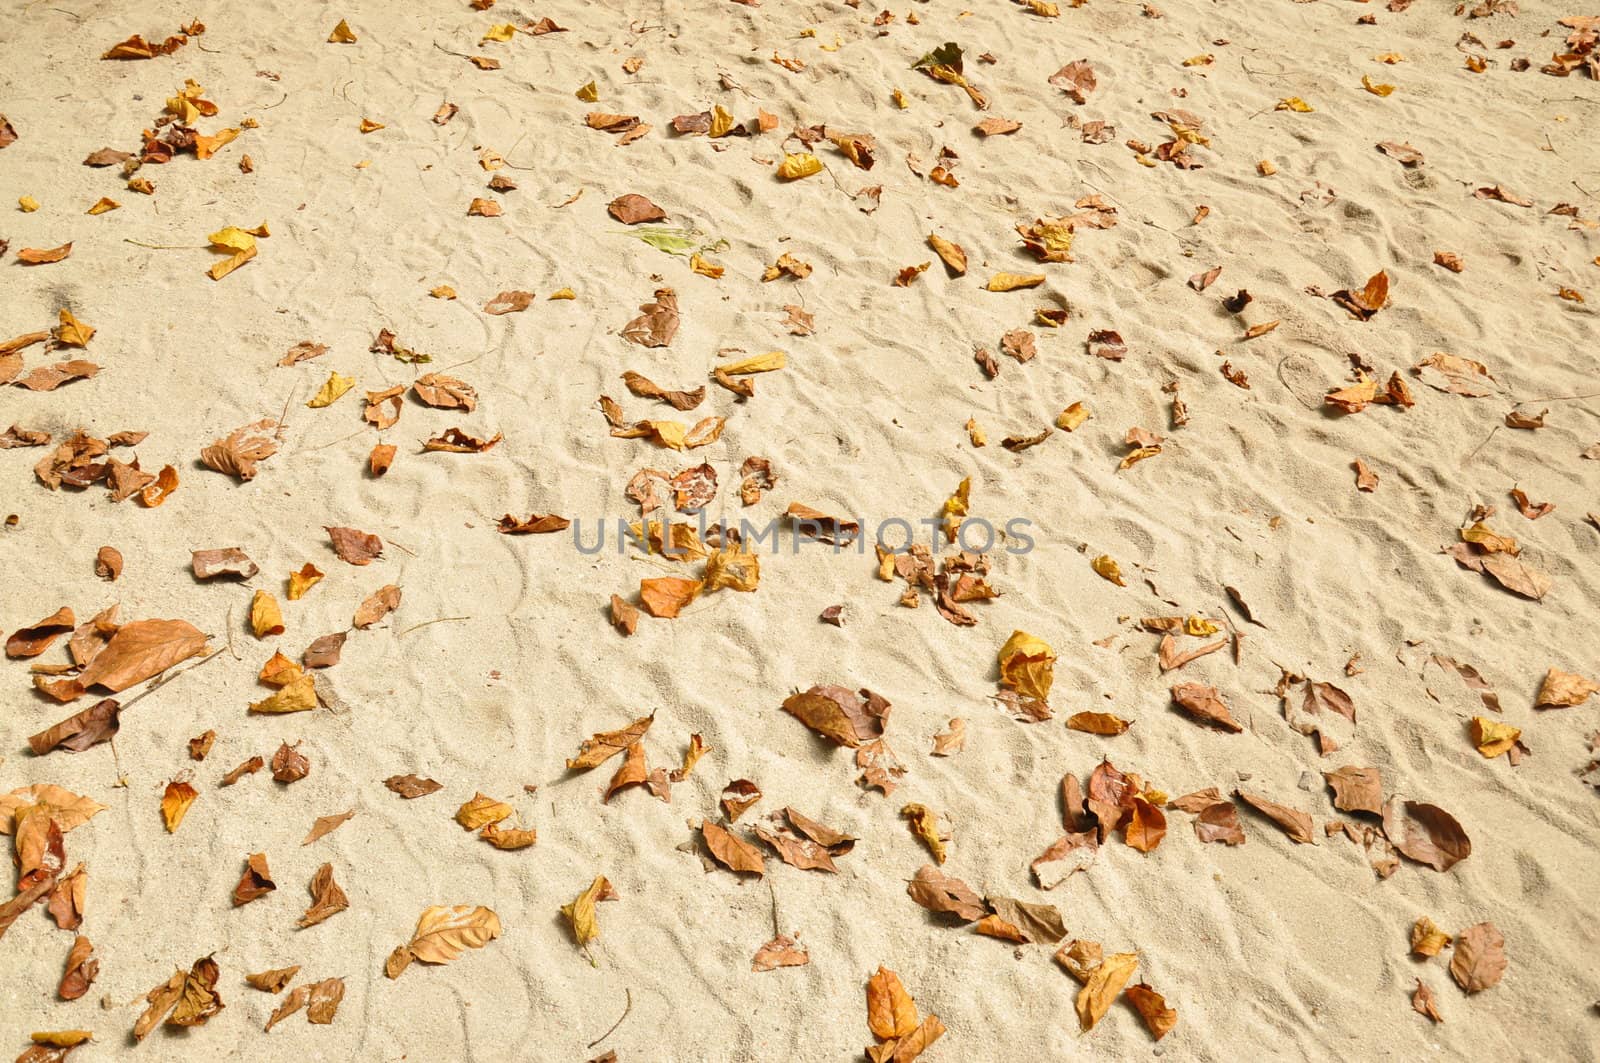 Brown leaves on the beach.